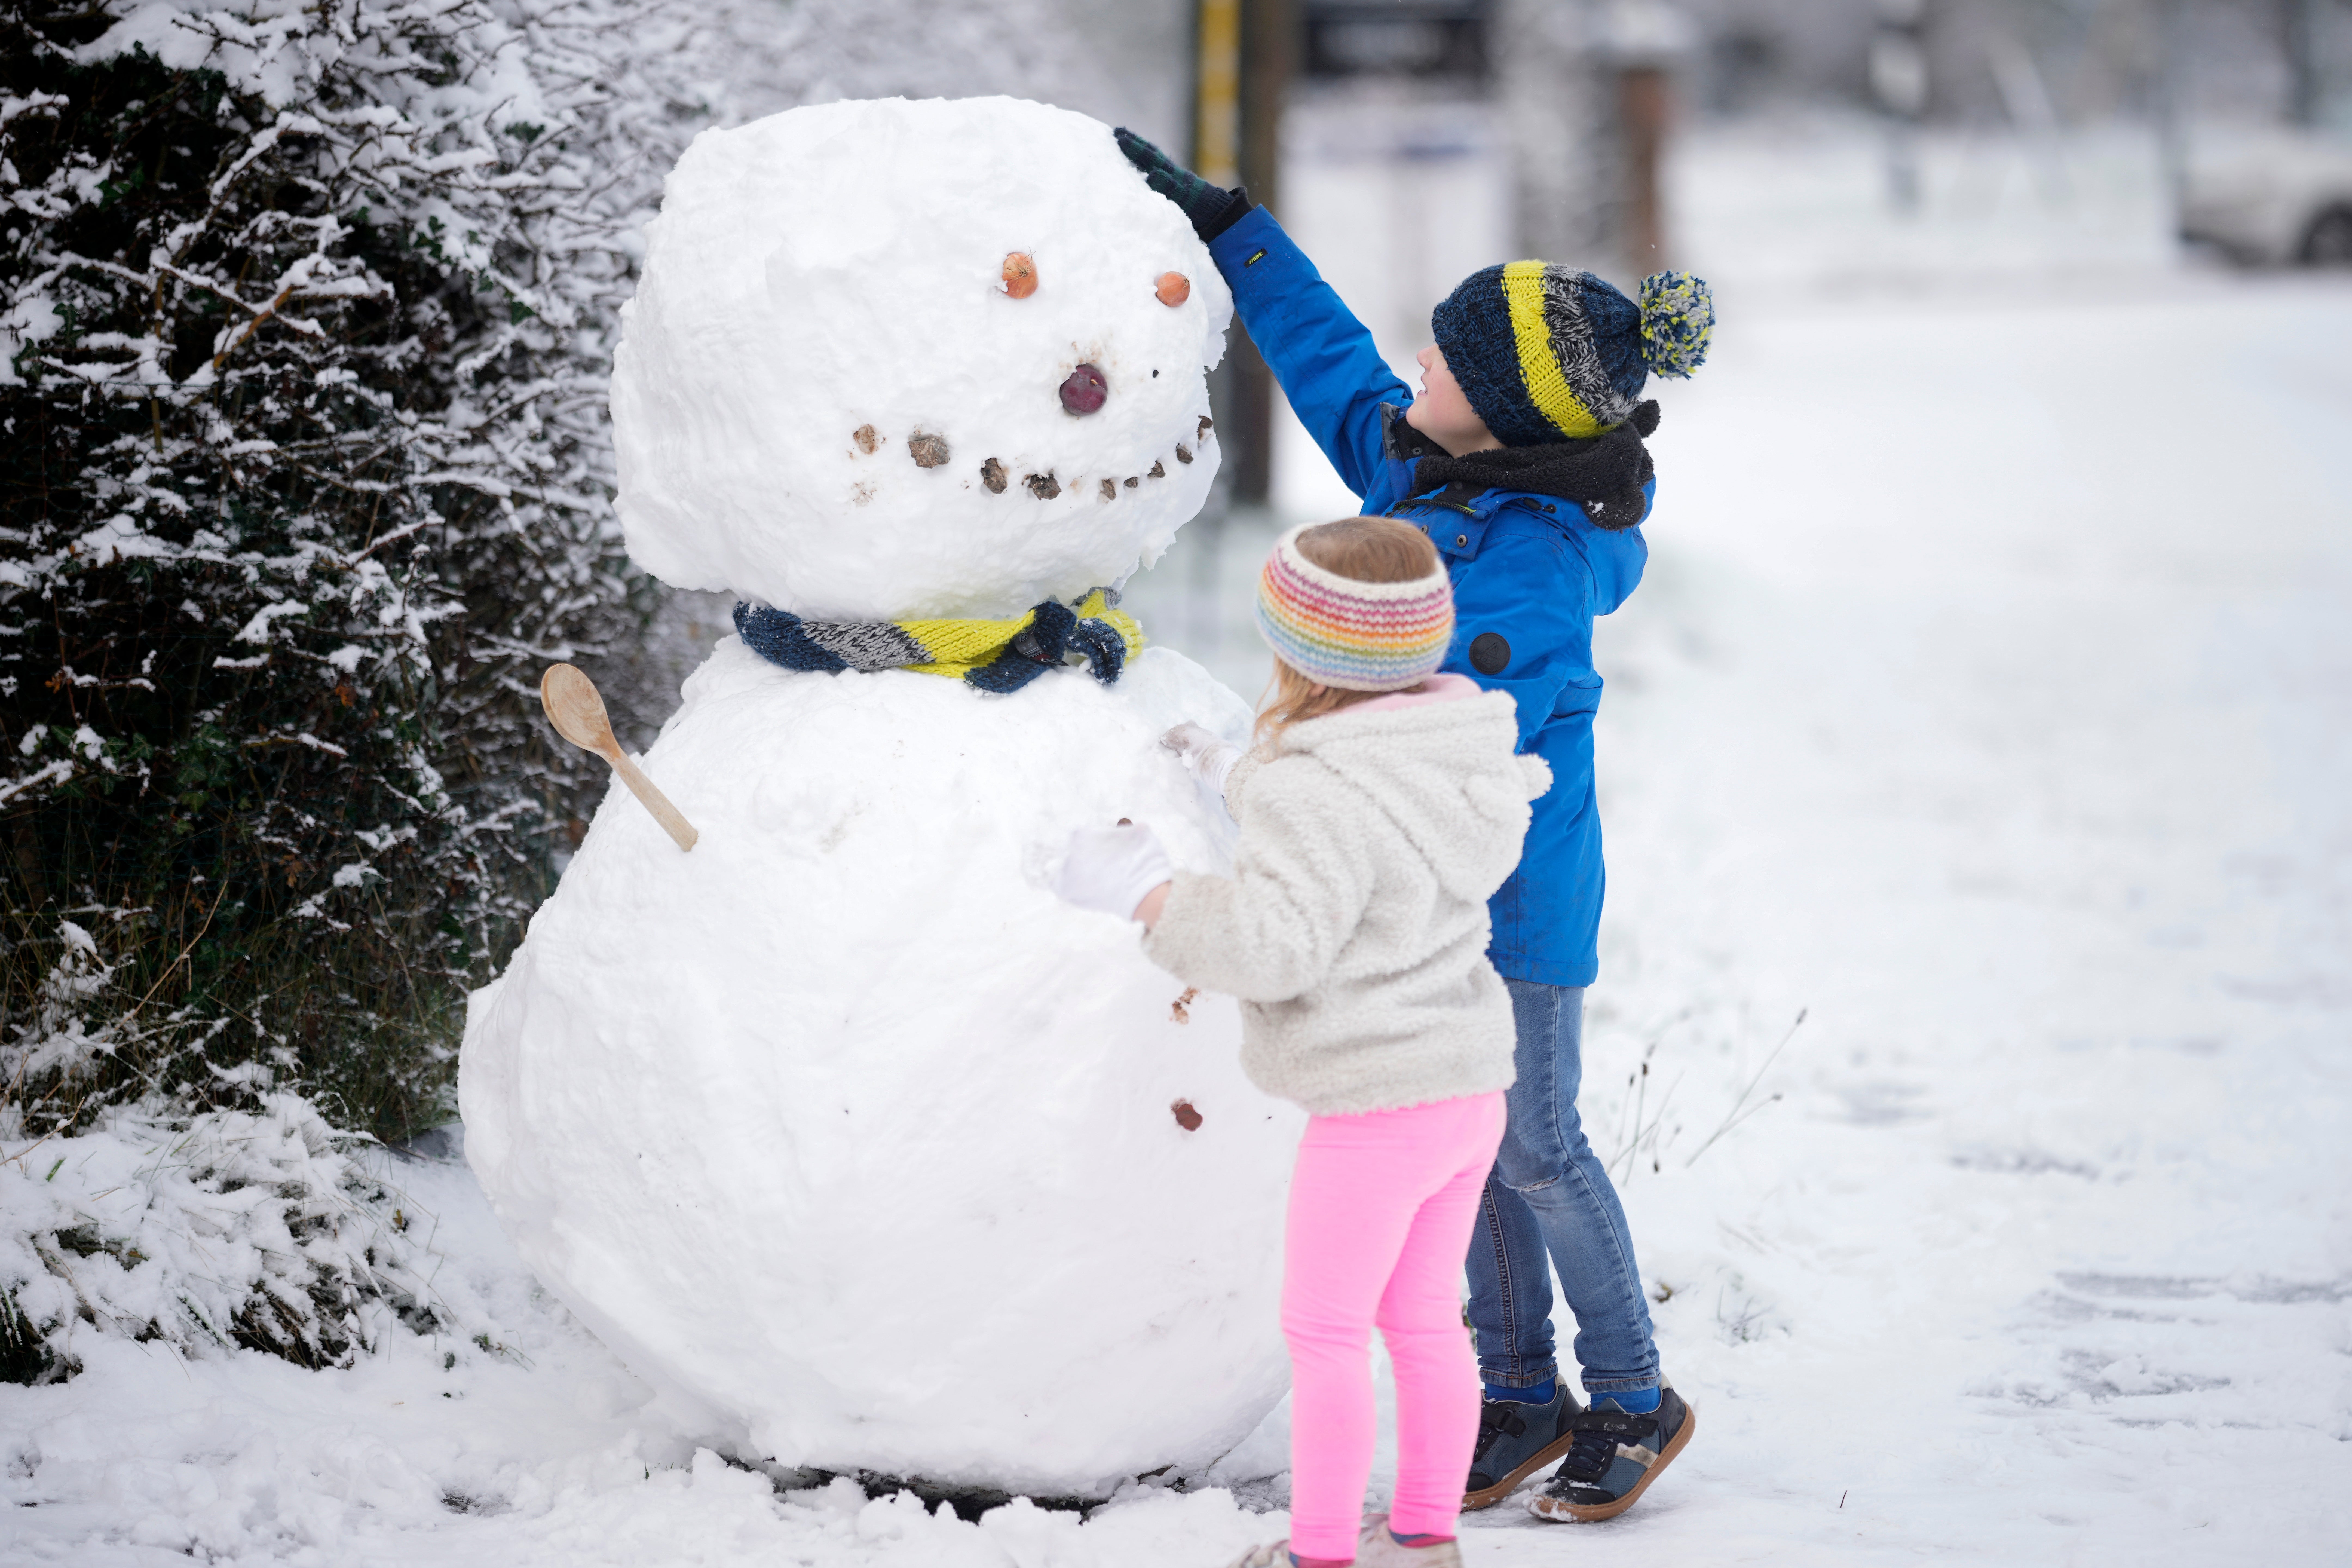 Children build a snowman after the first significant snow fall in Cheshire this winter in Northwich, United Kingdom